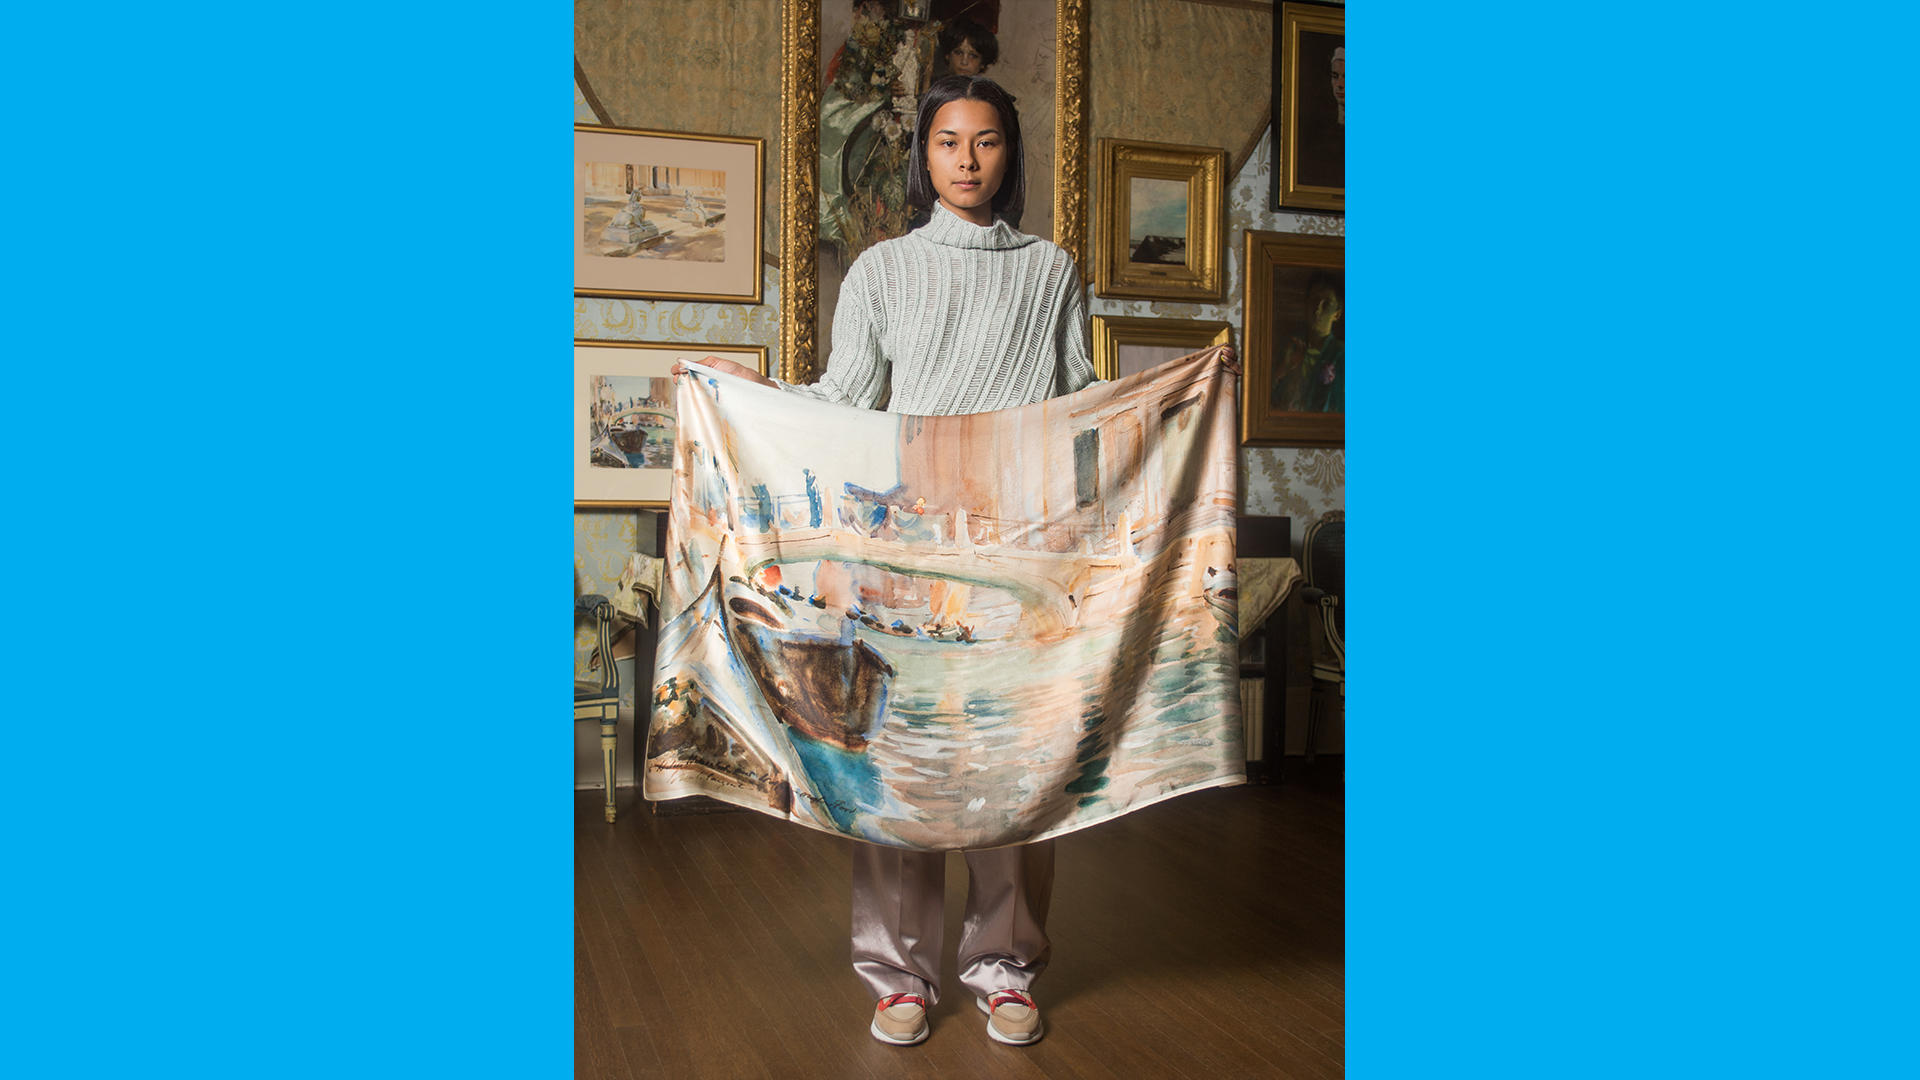 Printed Village scarves, photo by Ashley Soong, styling by Jessica Knez of All Too Human Boston, modeled by Jenny Nguyen